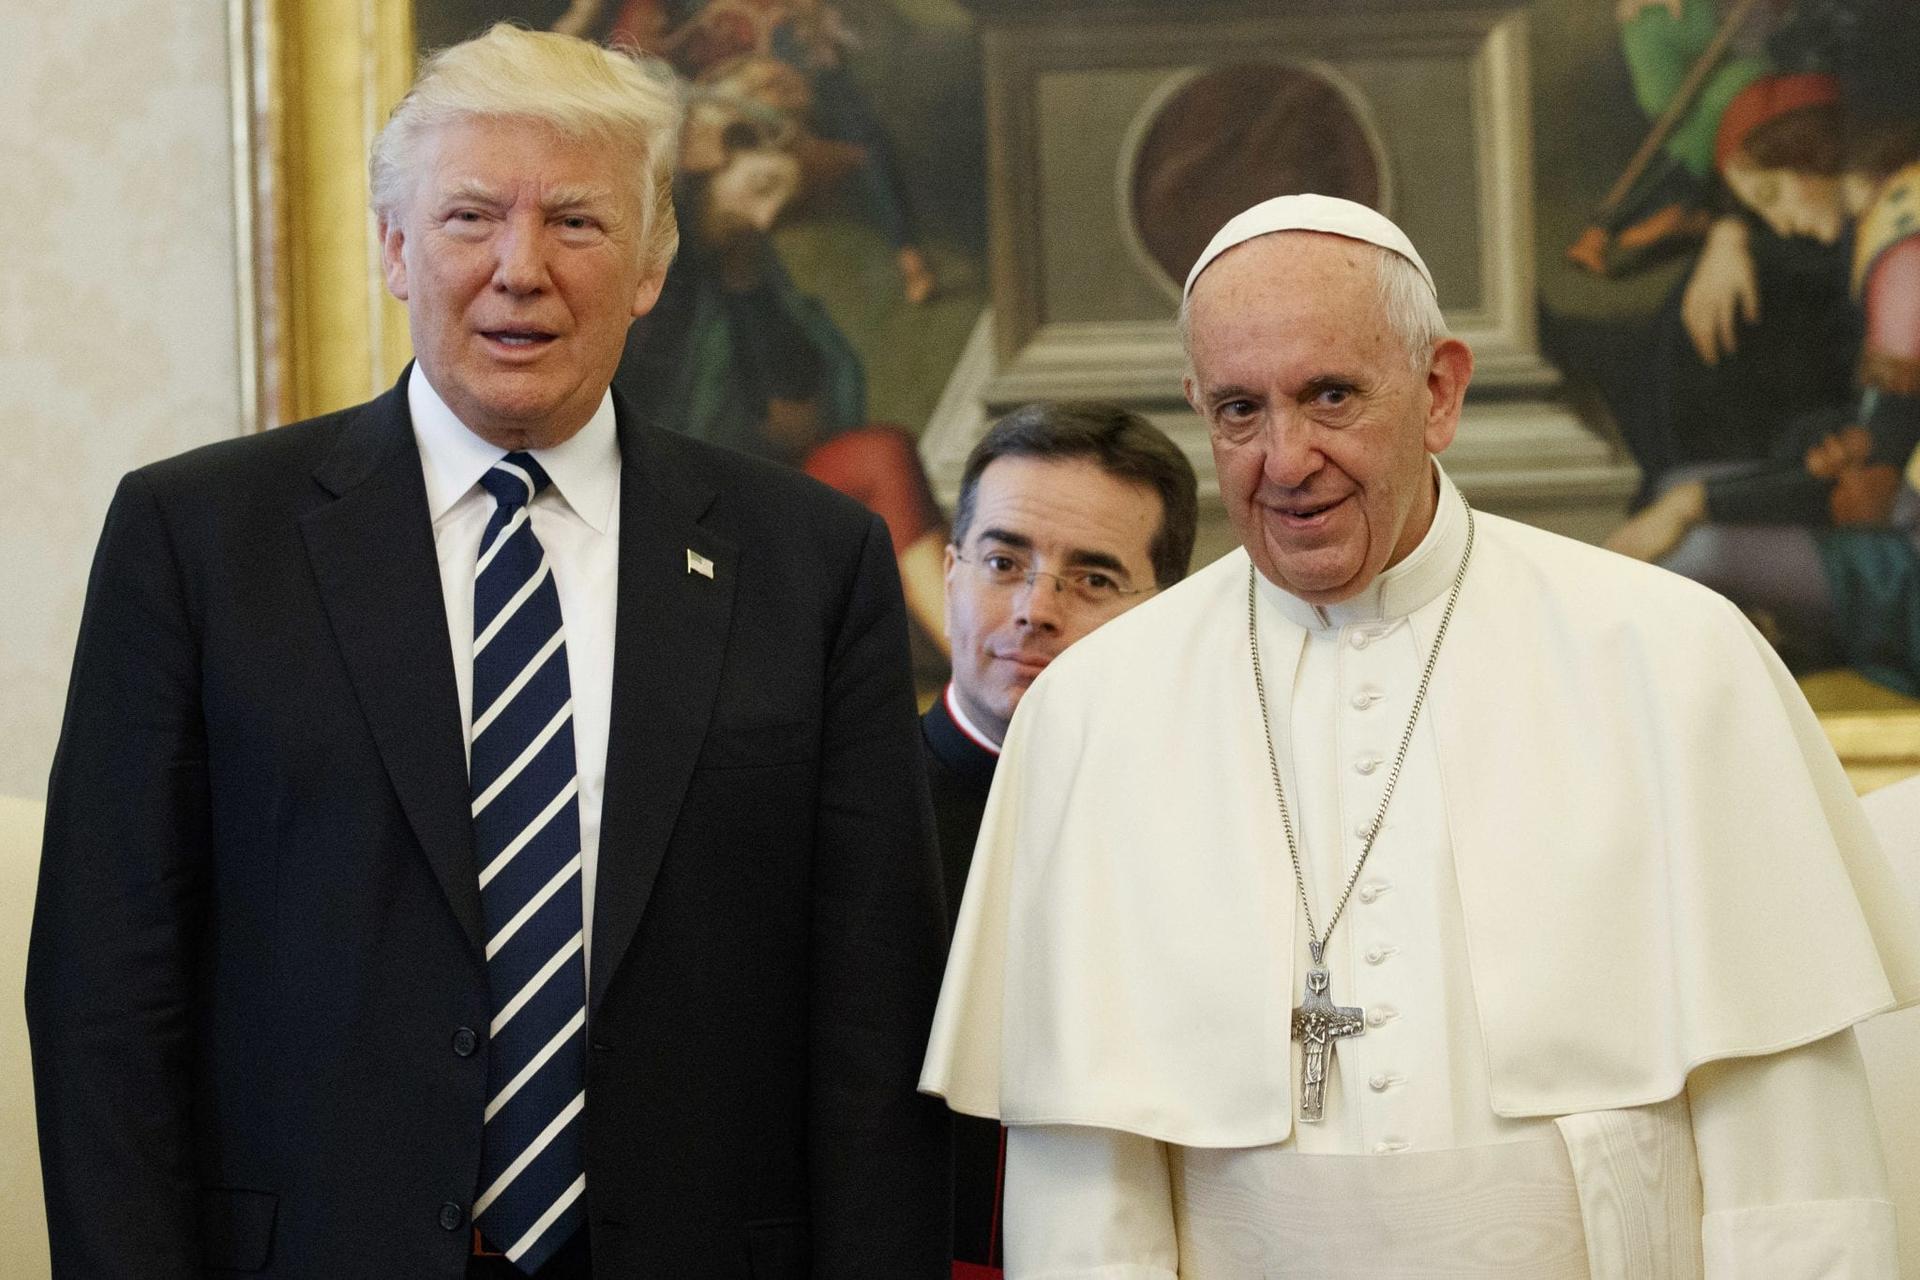 Pope and Trump focused on life, religious freedom and conscience, Vatican says